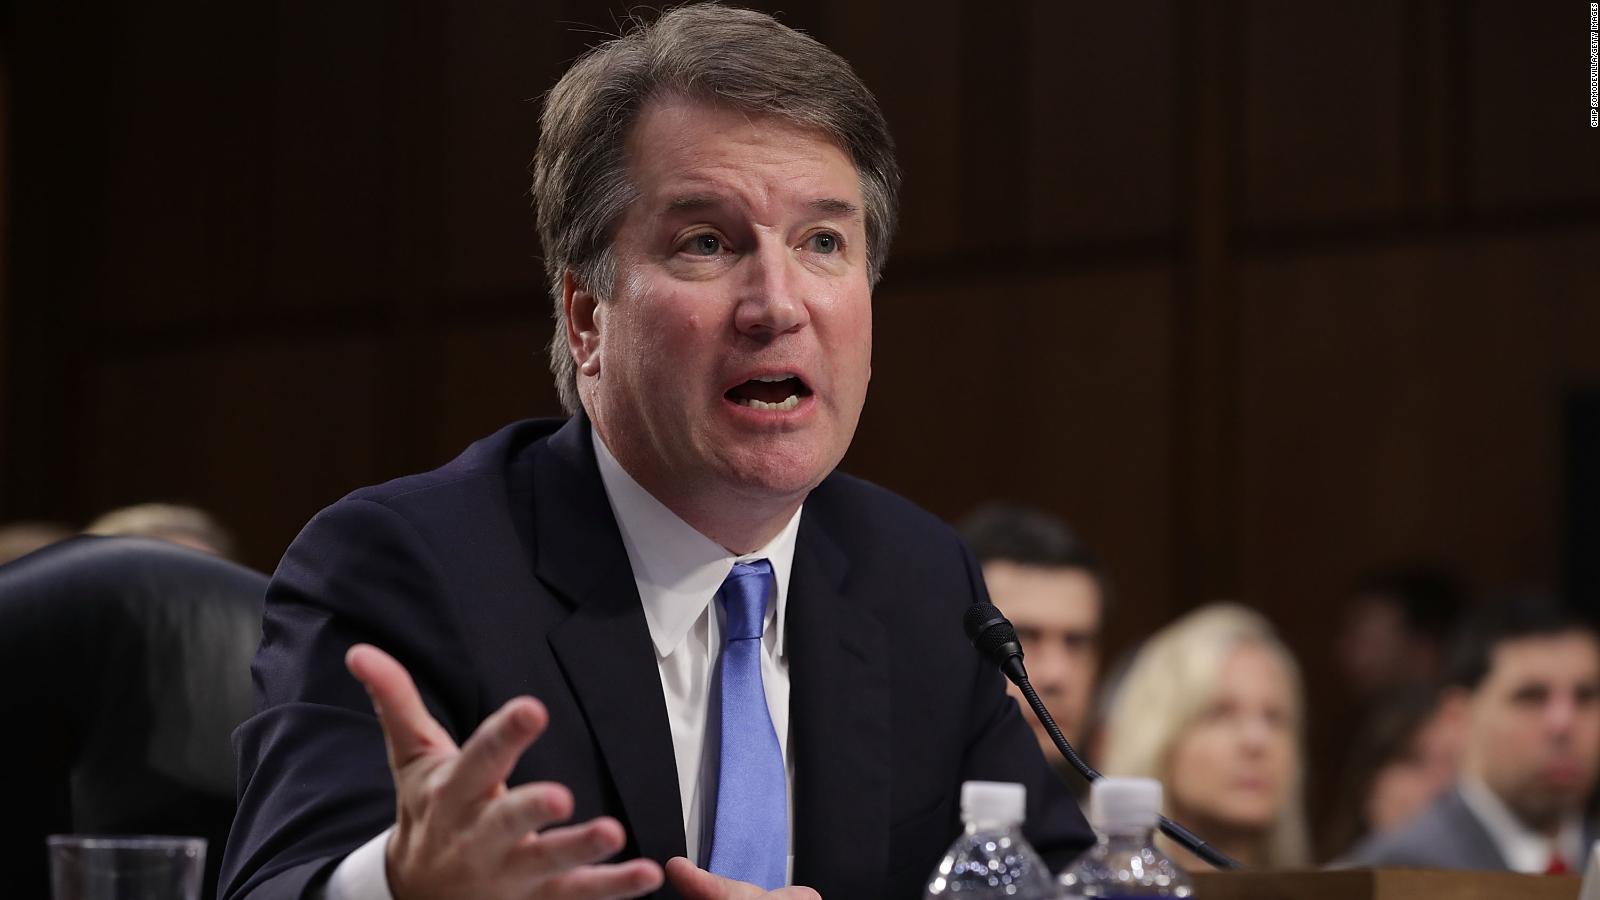 White House And Brett Kavanaugh Deny Allegation Made By Second Woman Cnnpolitics 